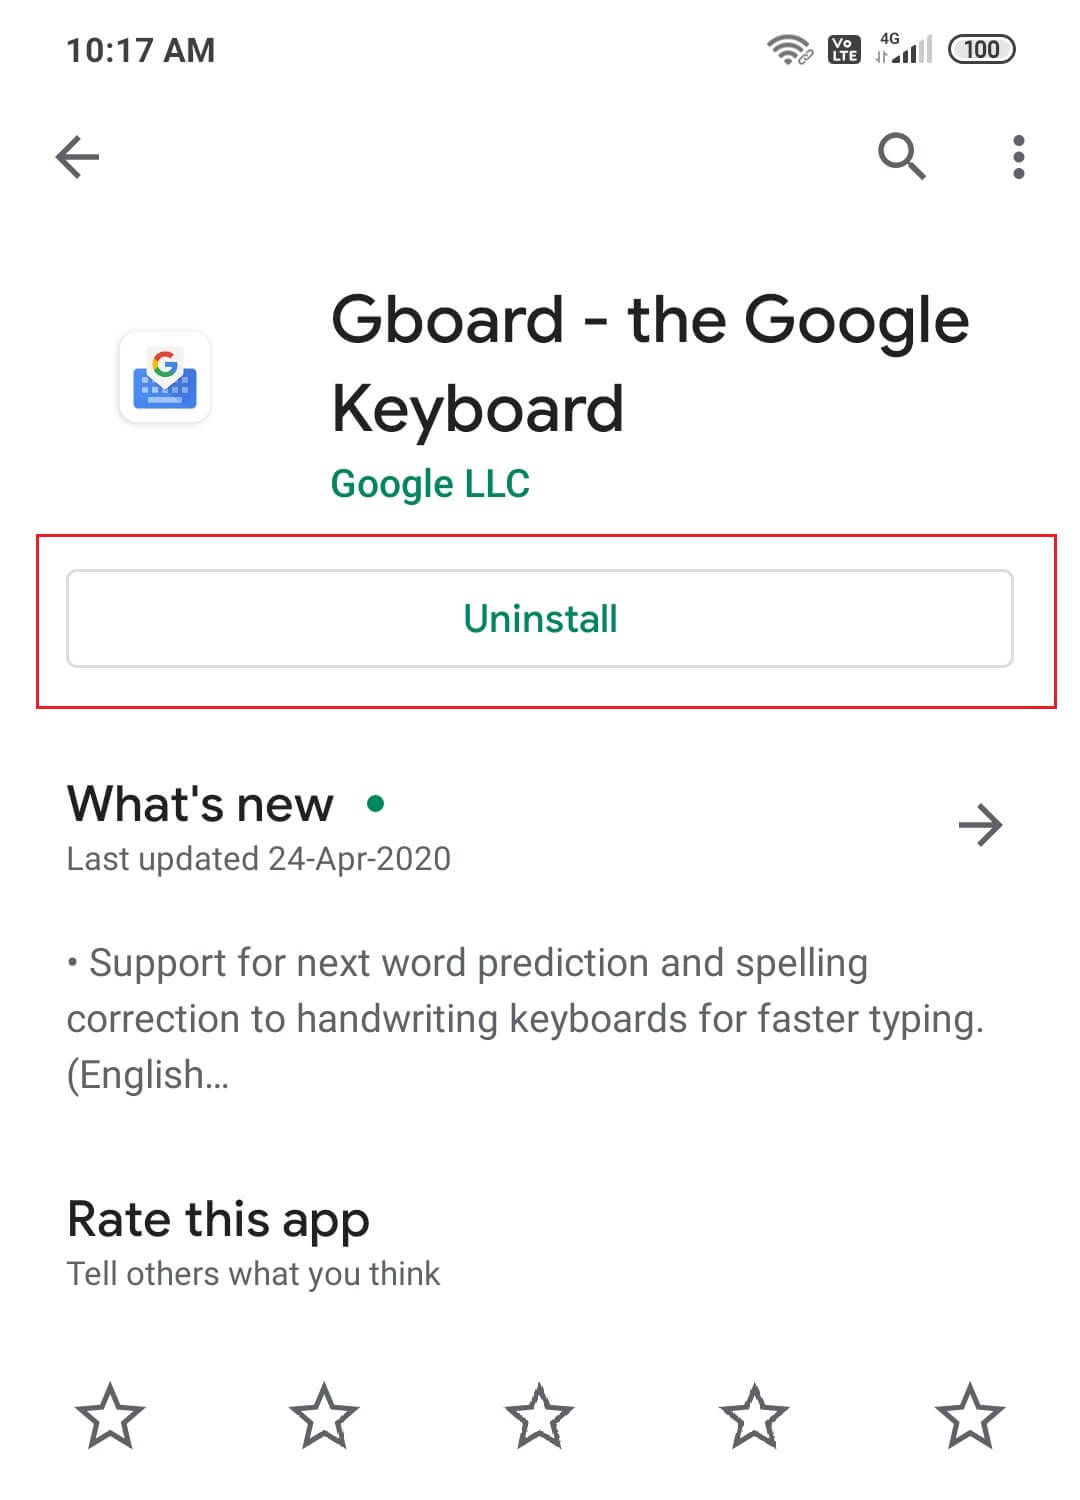 Uninstall Gboard and Install Again